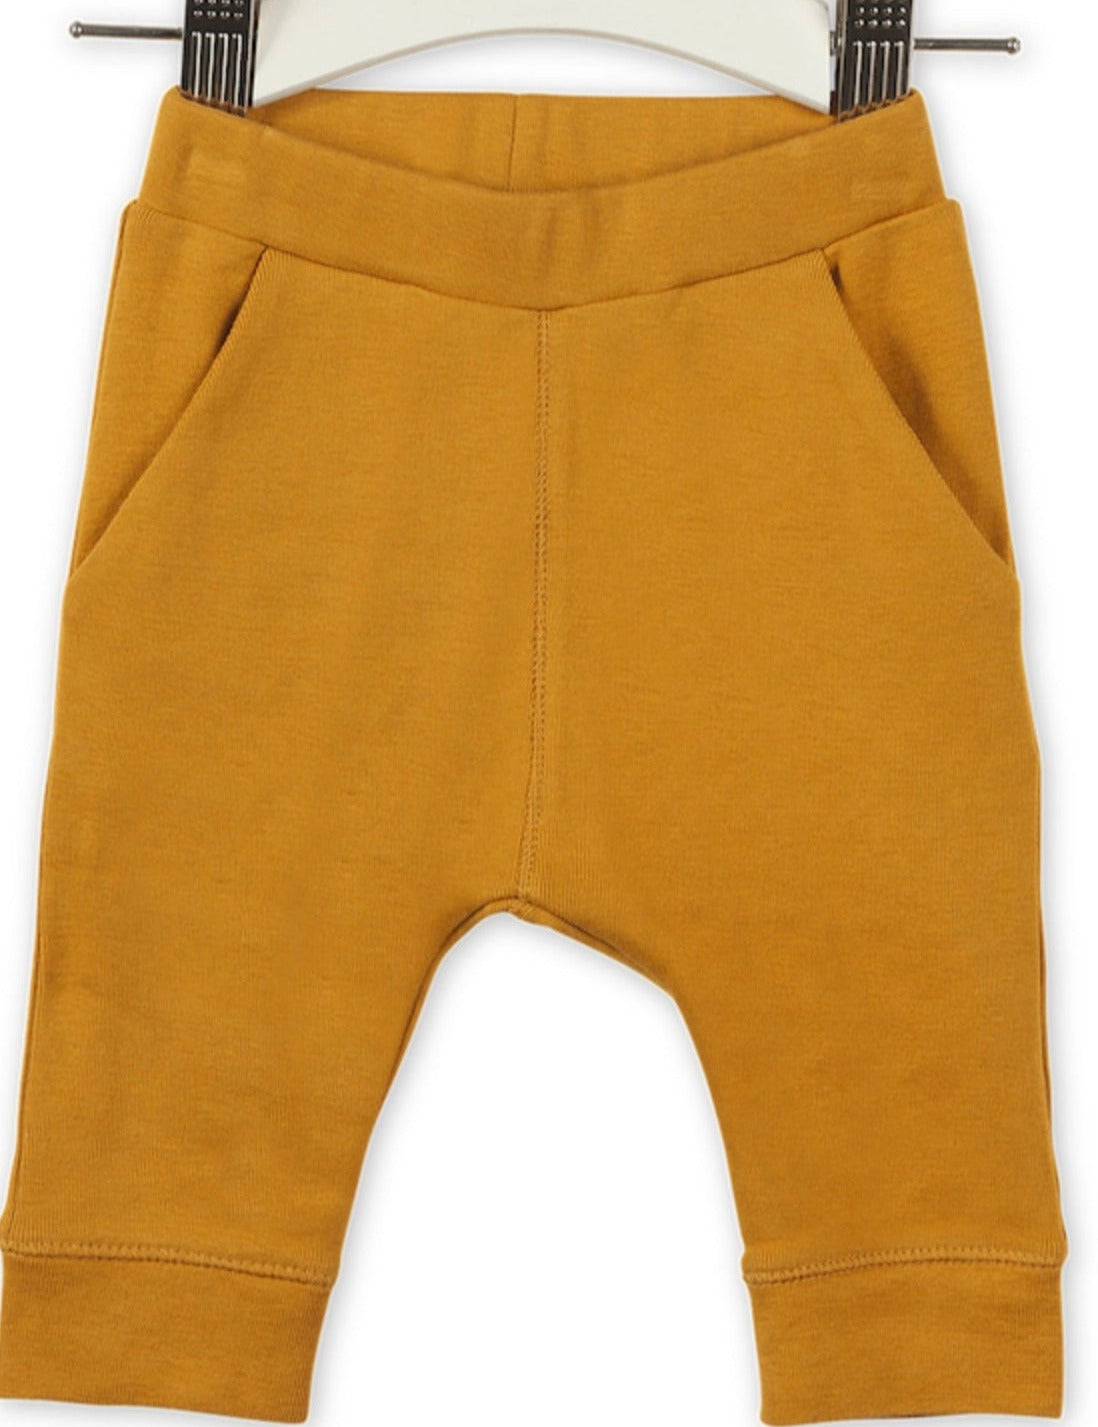 Imps & Elfs Pants in Organic Cotton for Mini Girls and Boys 0-12M - CapuletKids